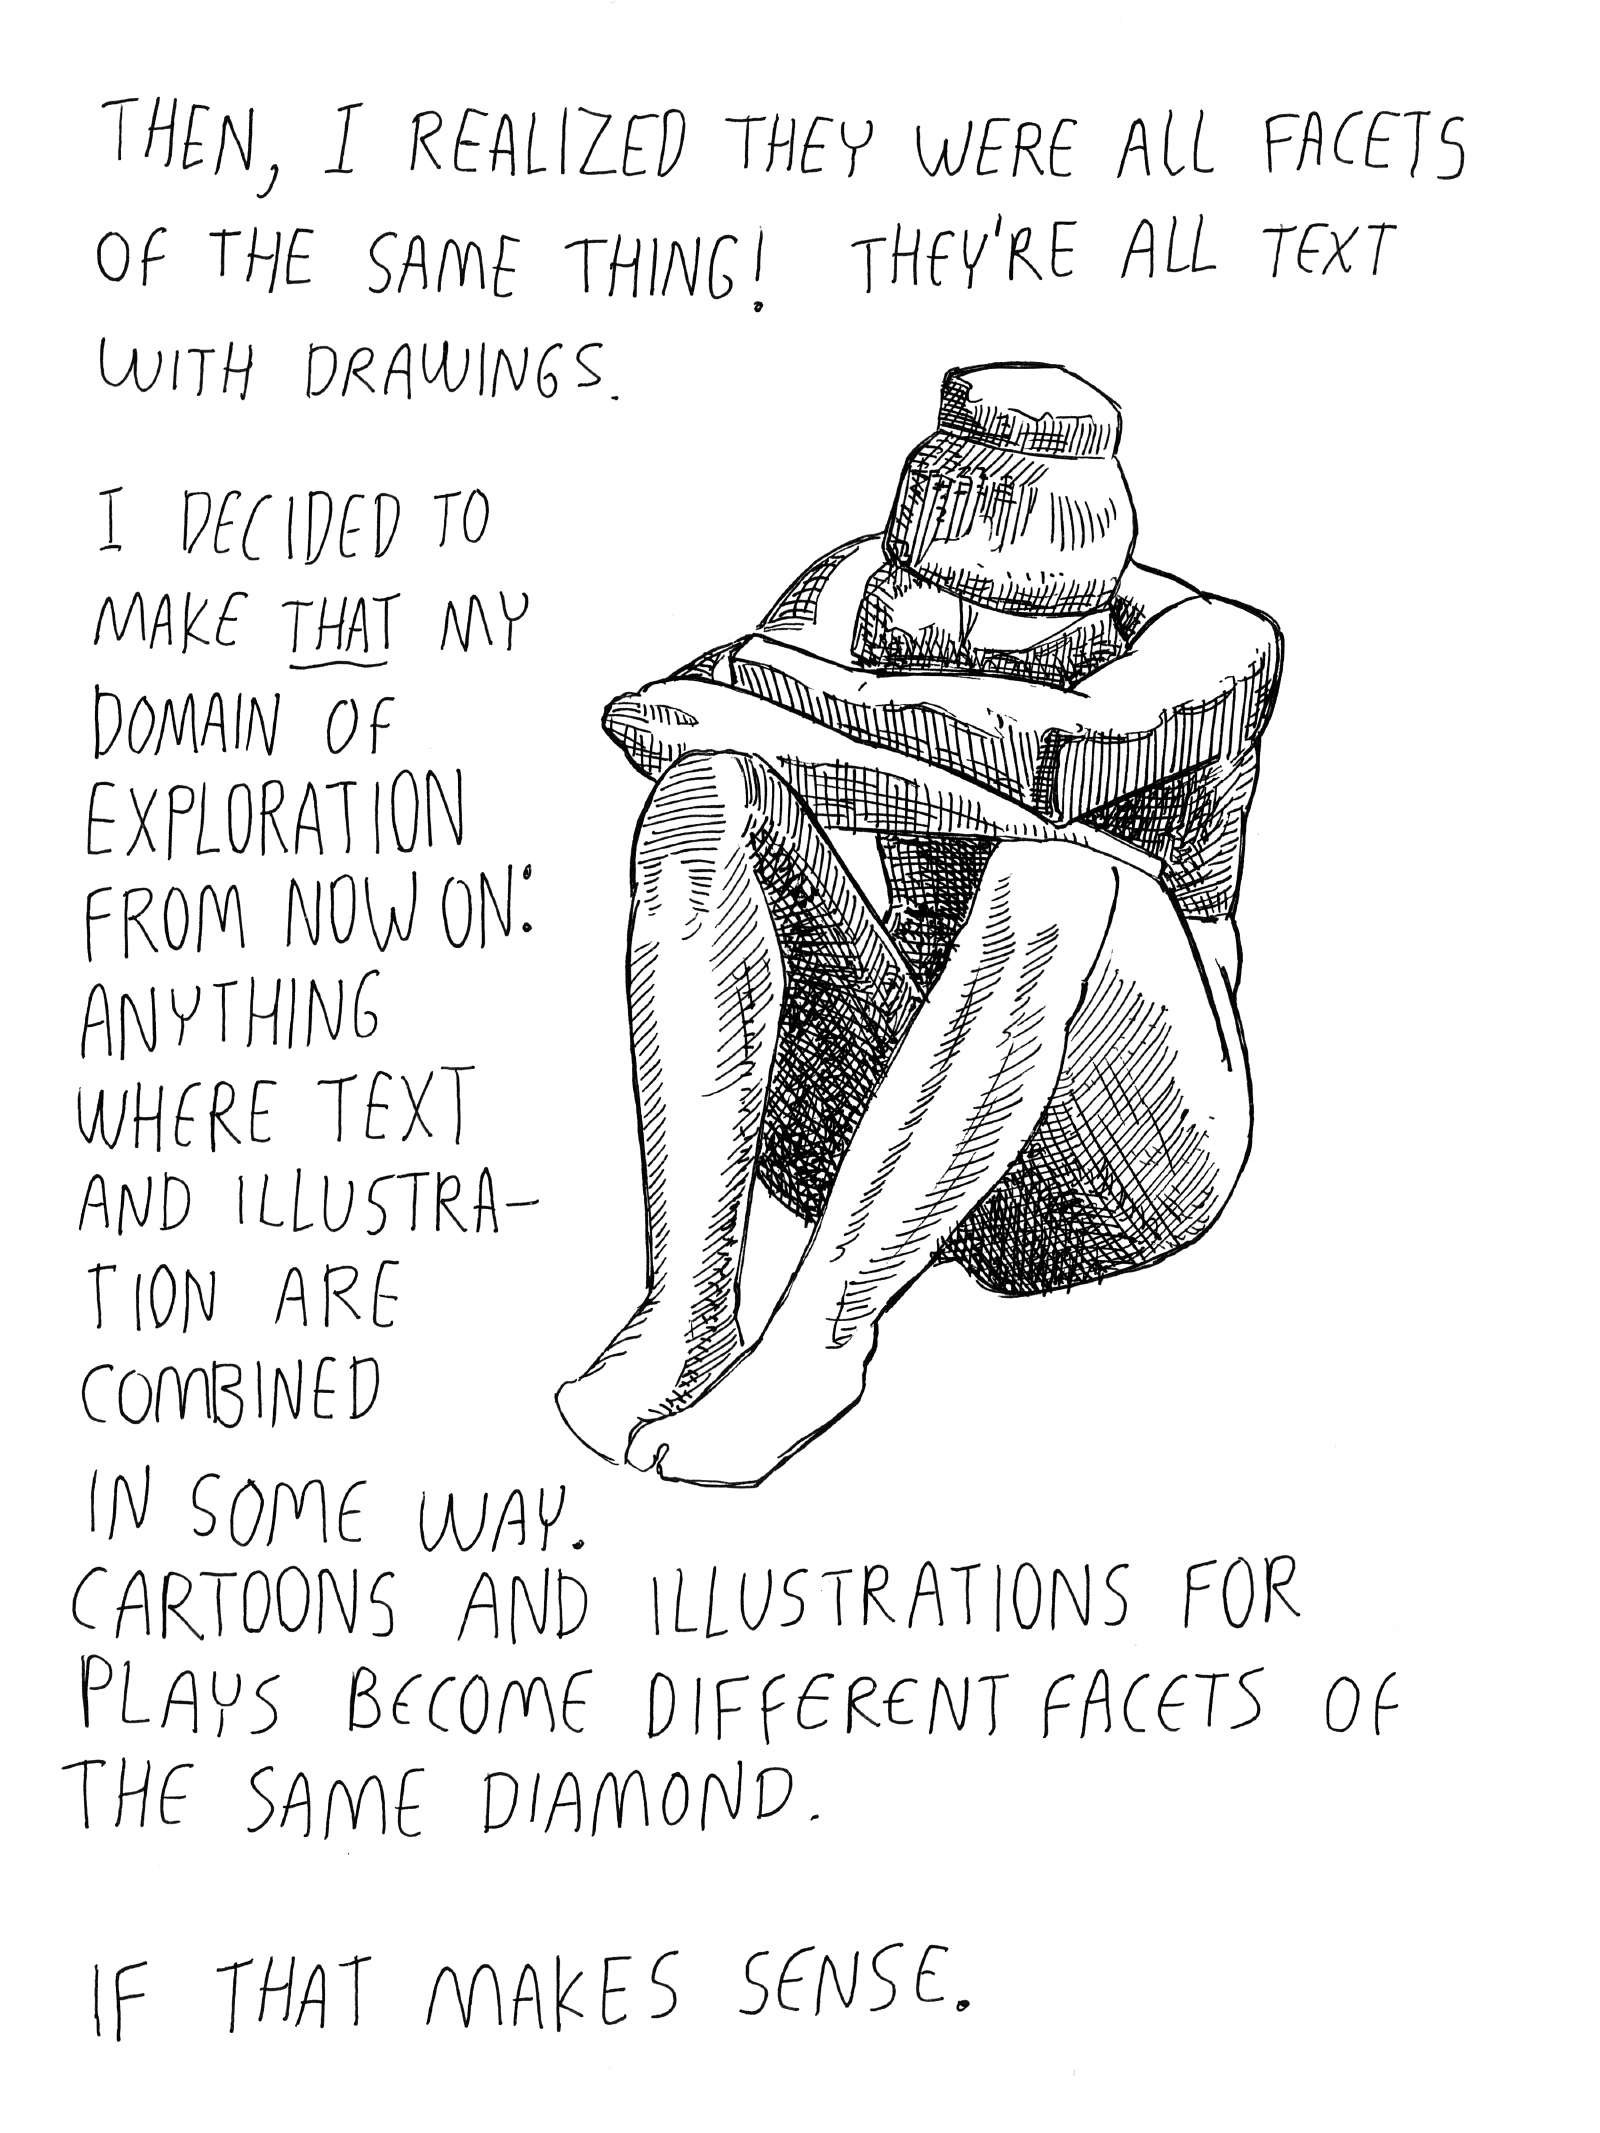 Then, I realized they were all facets of the same thing! They are all text with drawn illustrations. I decided to make that my domain of exploration from now on: anything where text and illustration are combined in some way. Cartoons and illustrations for plays become different facets of the same diamond. If that makes sense.